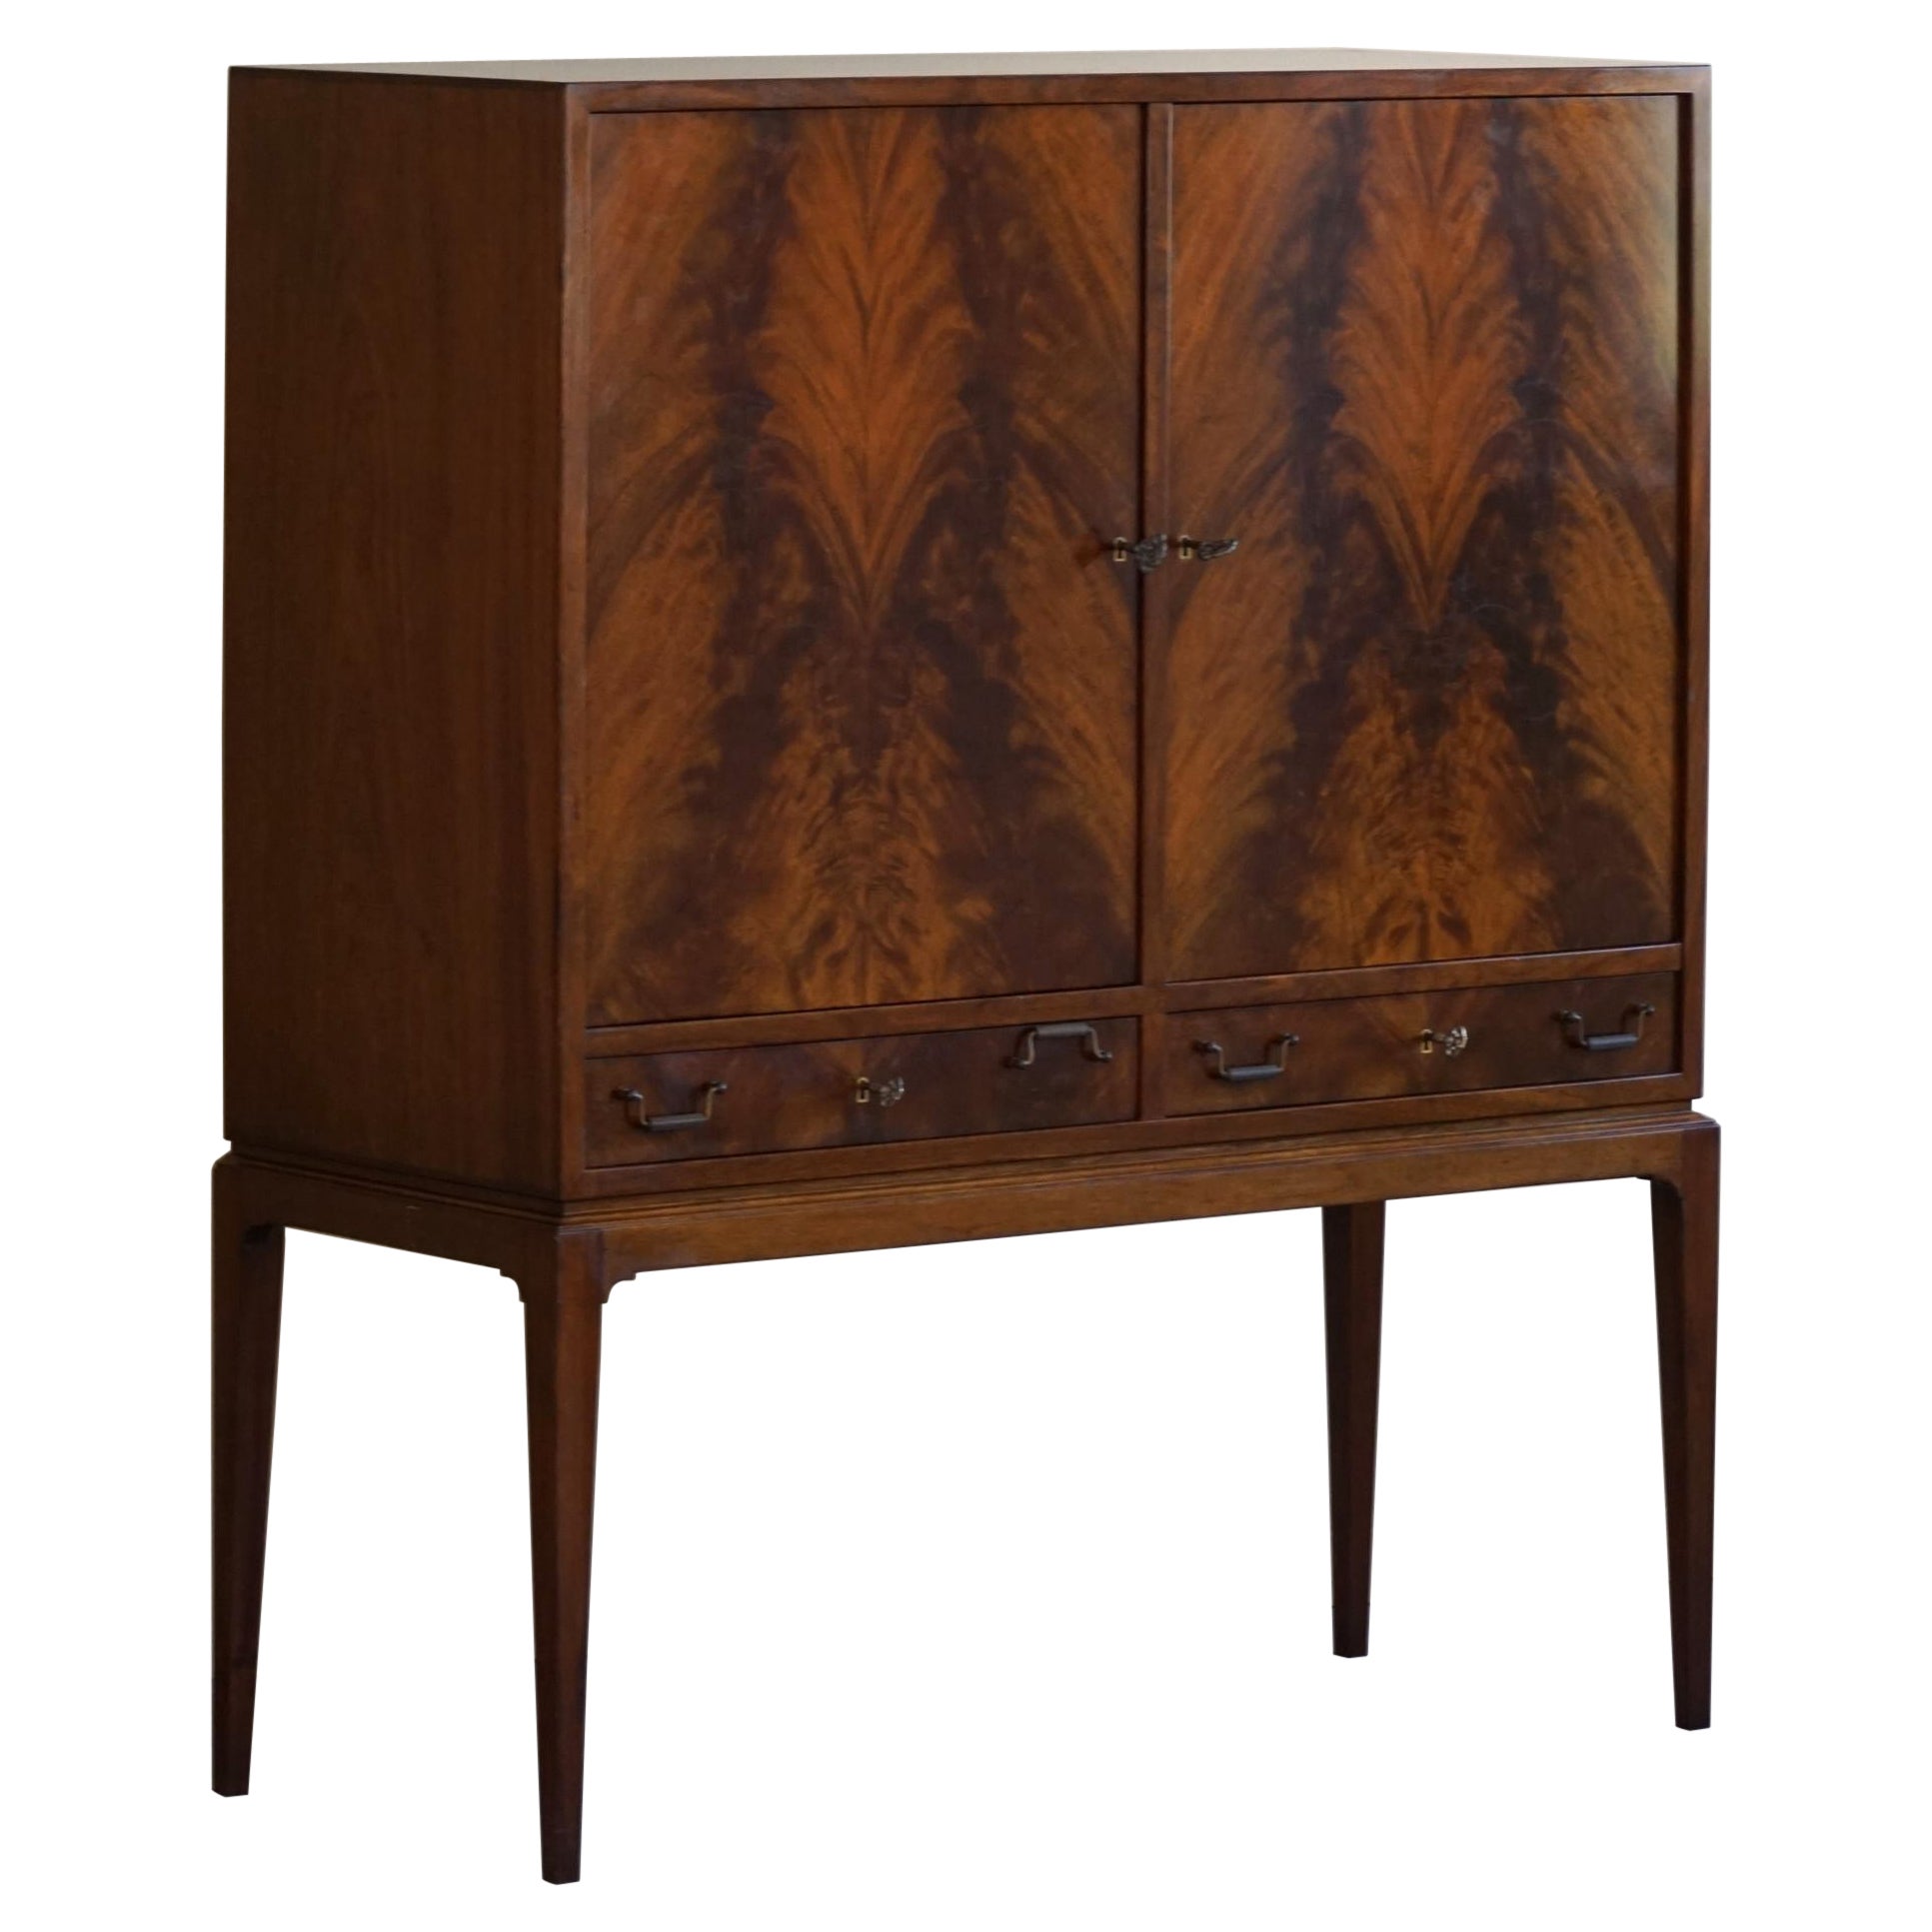 Classic Walnut Cabinet, Made by a Danish Cabinetmaker, Midcentury, 1950s For Sale